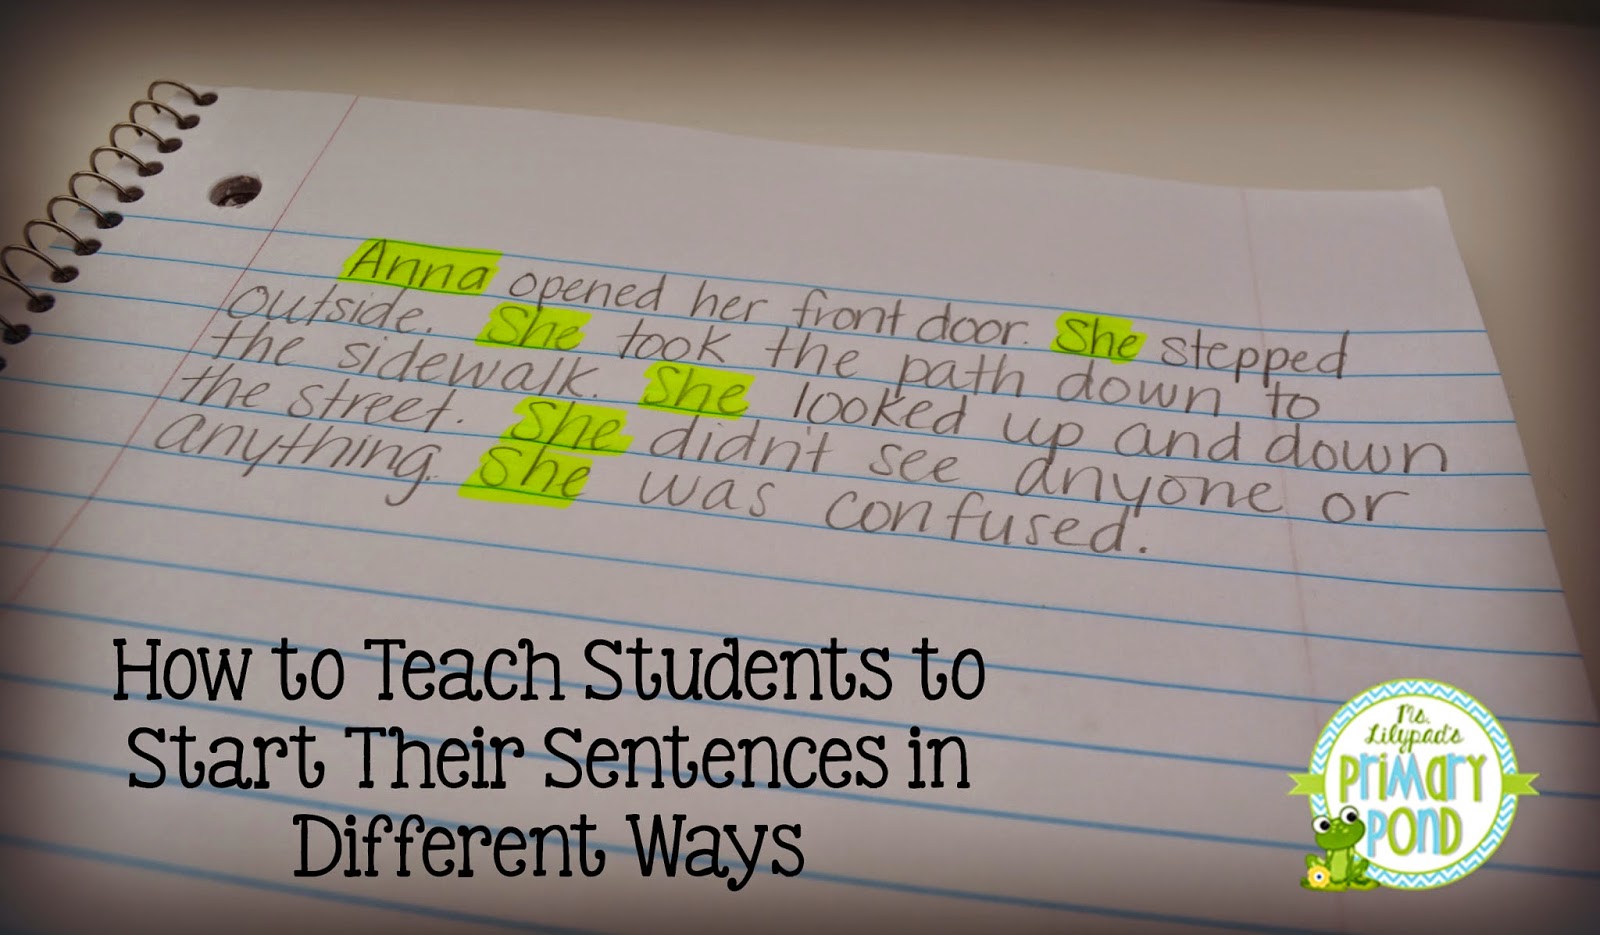 who-s-who-and-who-s-new-teaching-kids-to-start-their-sentences-differently